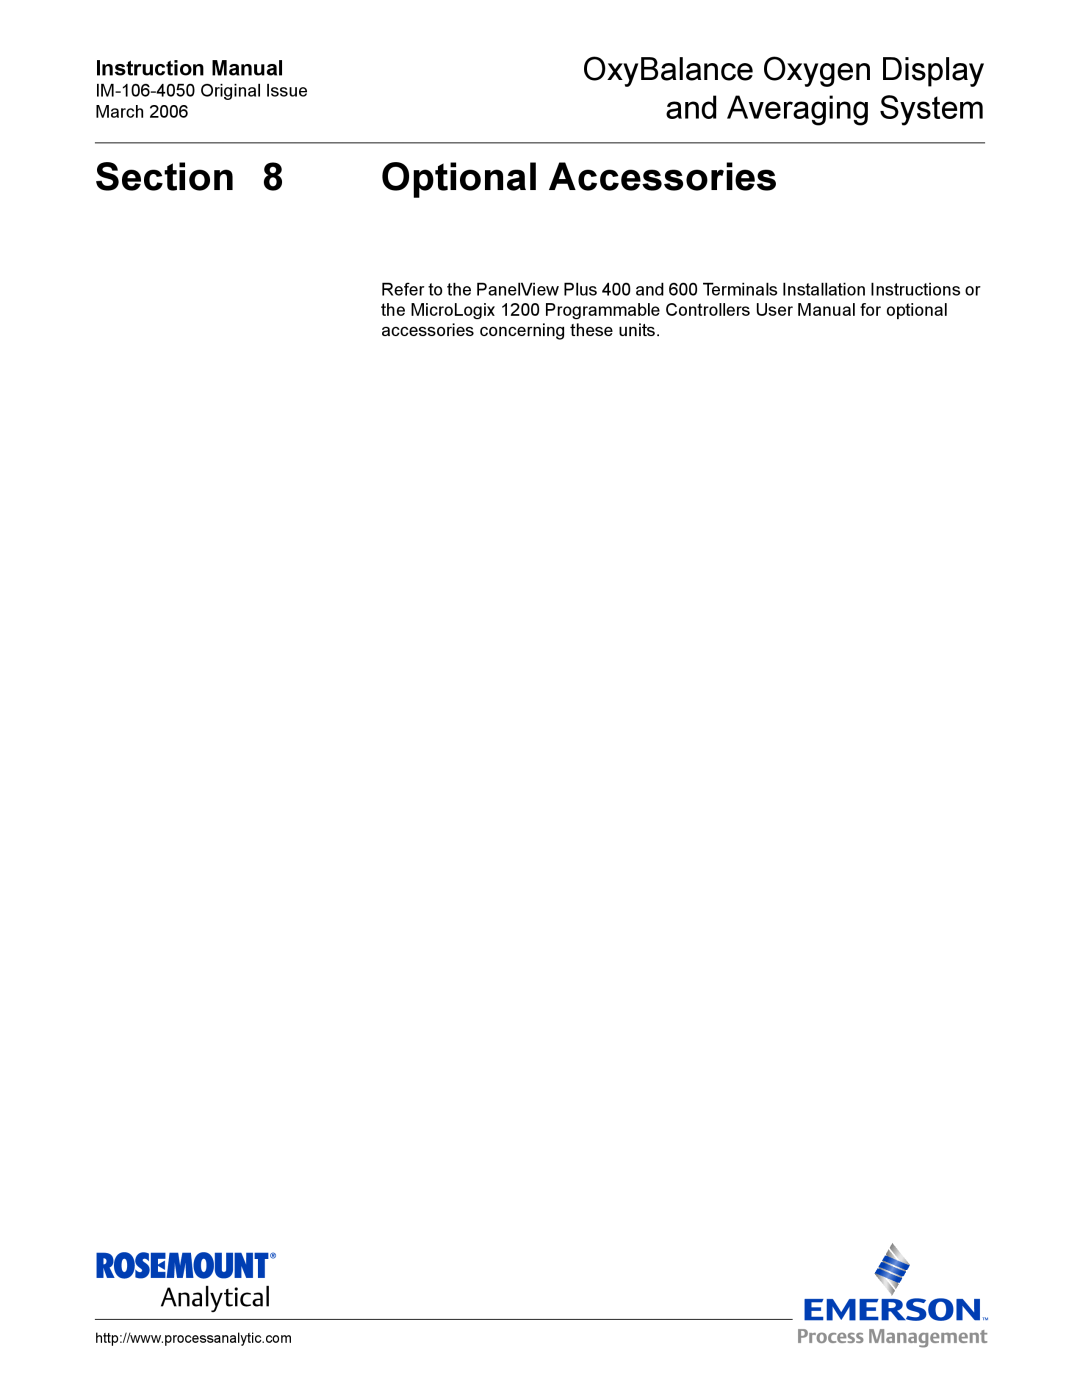 Emerson IM-106-4050 instruction manual Optional Accessories, OxyBalance Oxygen Display and Averaging System 